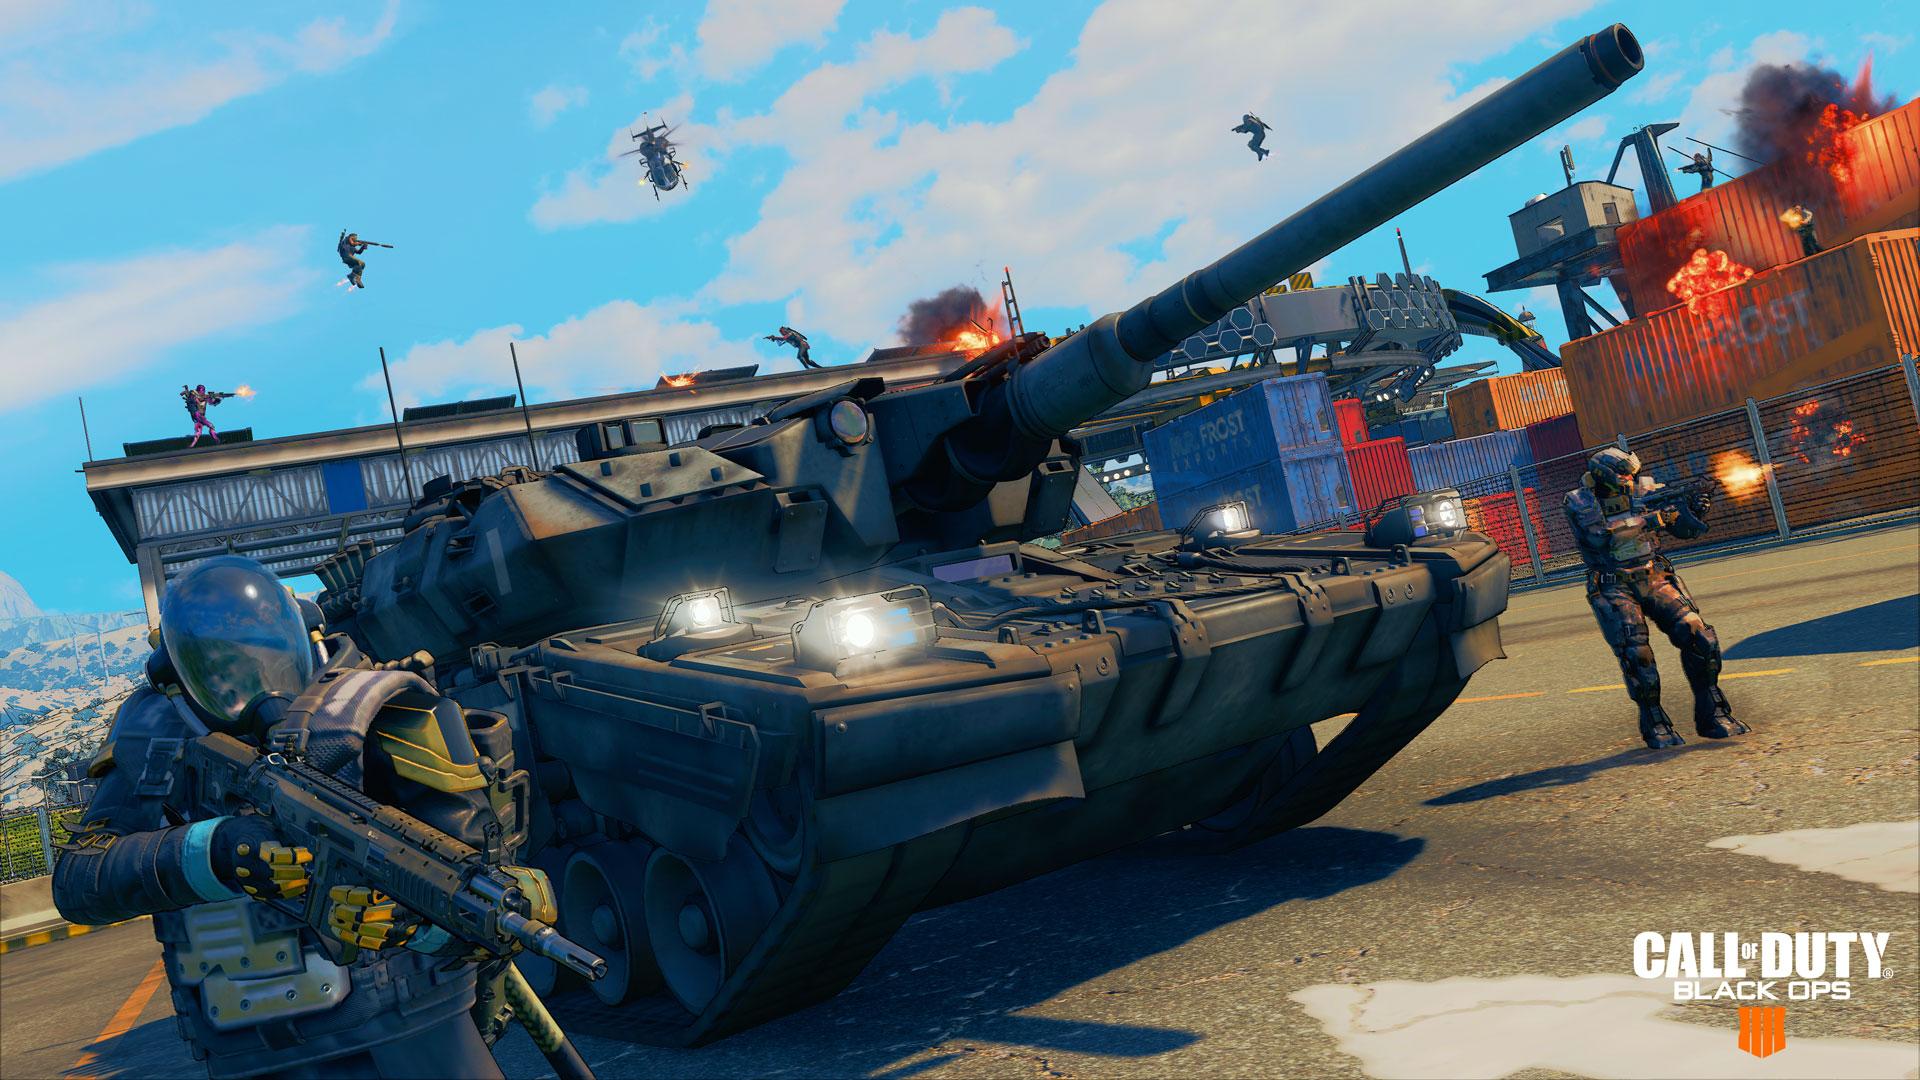 Call of Duty: Black Ops 4 battle royale is getting tanks